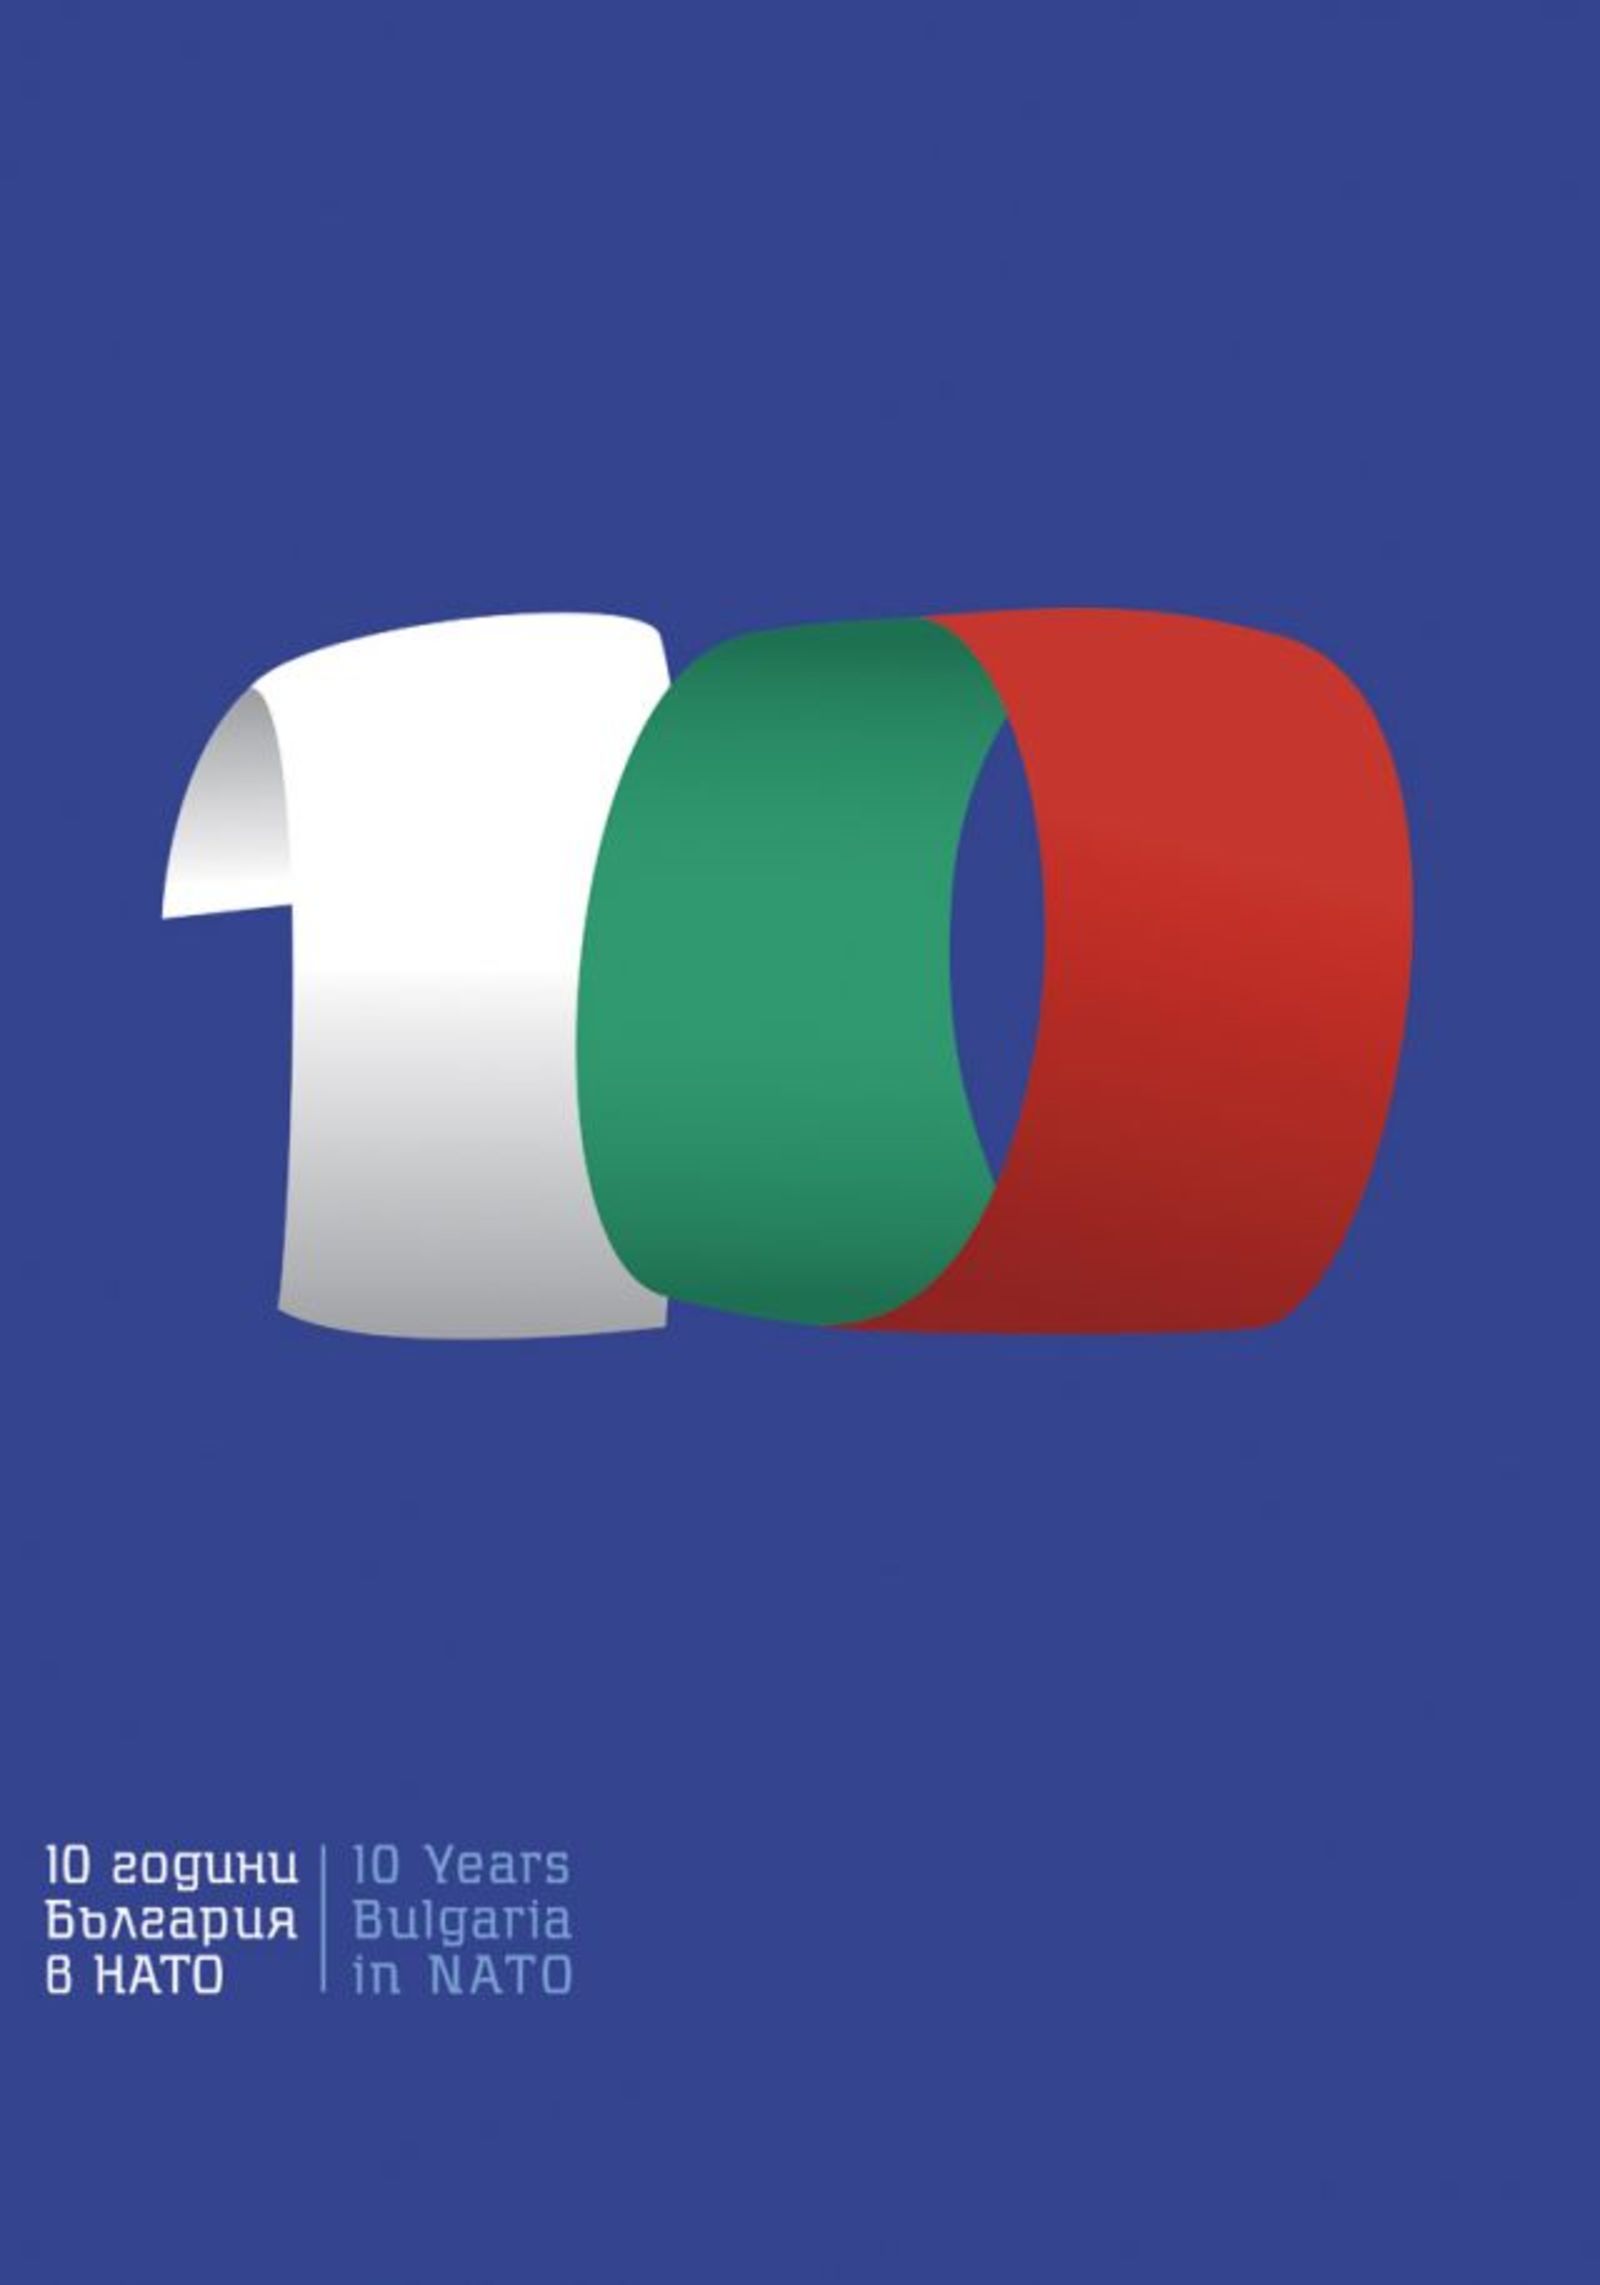 An Art Posters Exhibition "10 Years Bulgaria in NATO" at the Mission Gallery